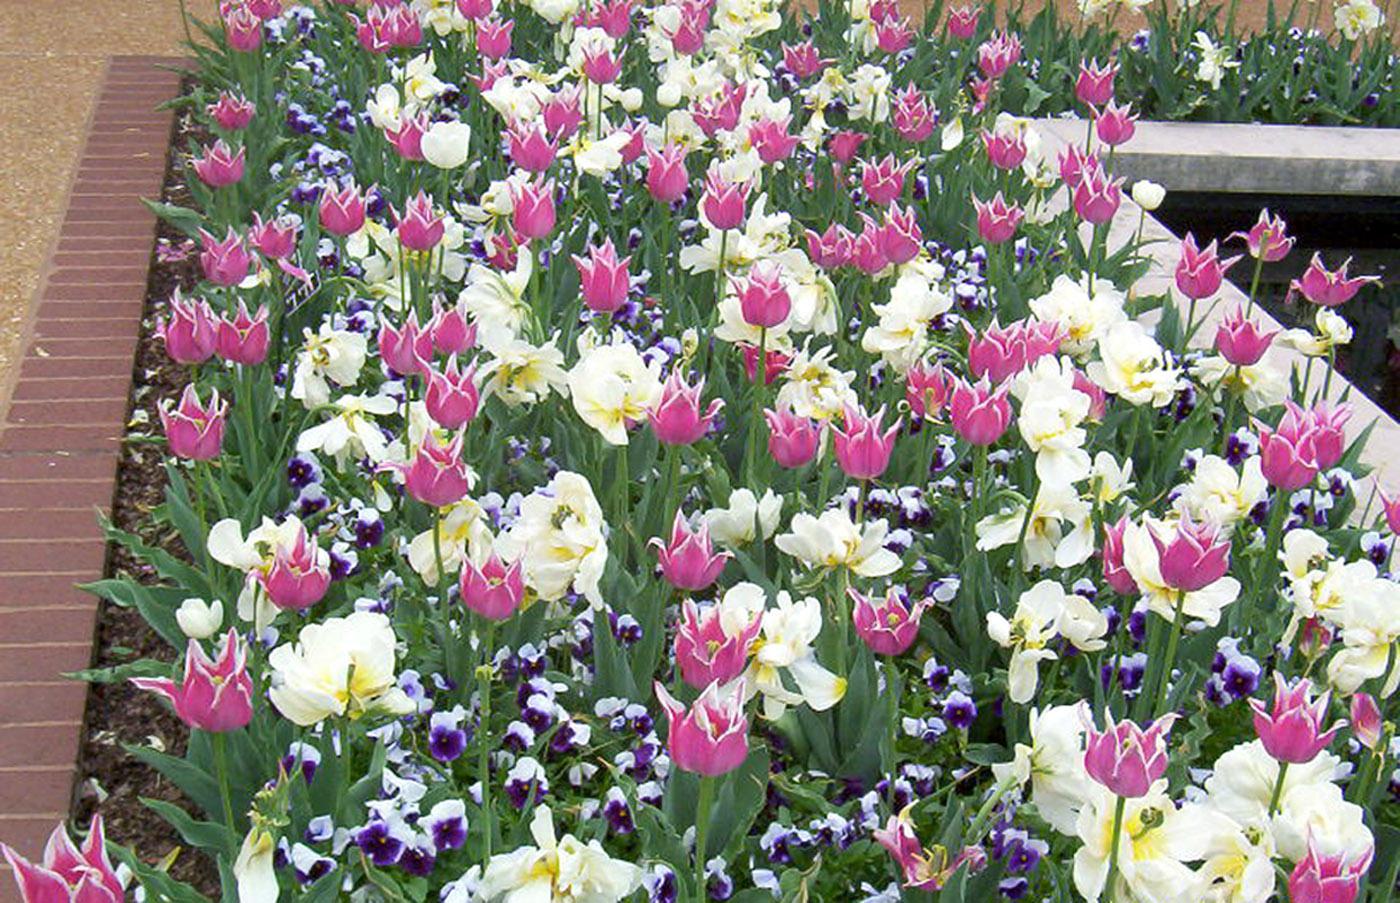 Accessorize spring-flowering bulbs to hide the ratty foliage that must remain afterwards to ensure a good bloom next year. Here, pansies are interplanted with tulips, providing color and camouflage. (Photo by Gary Bachman)